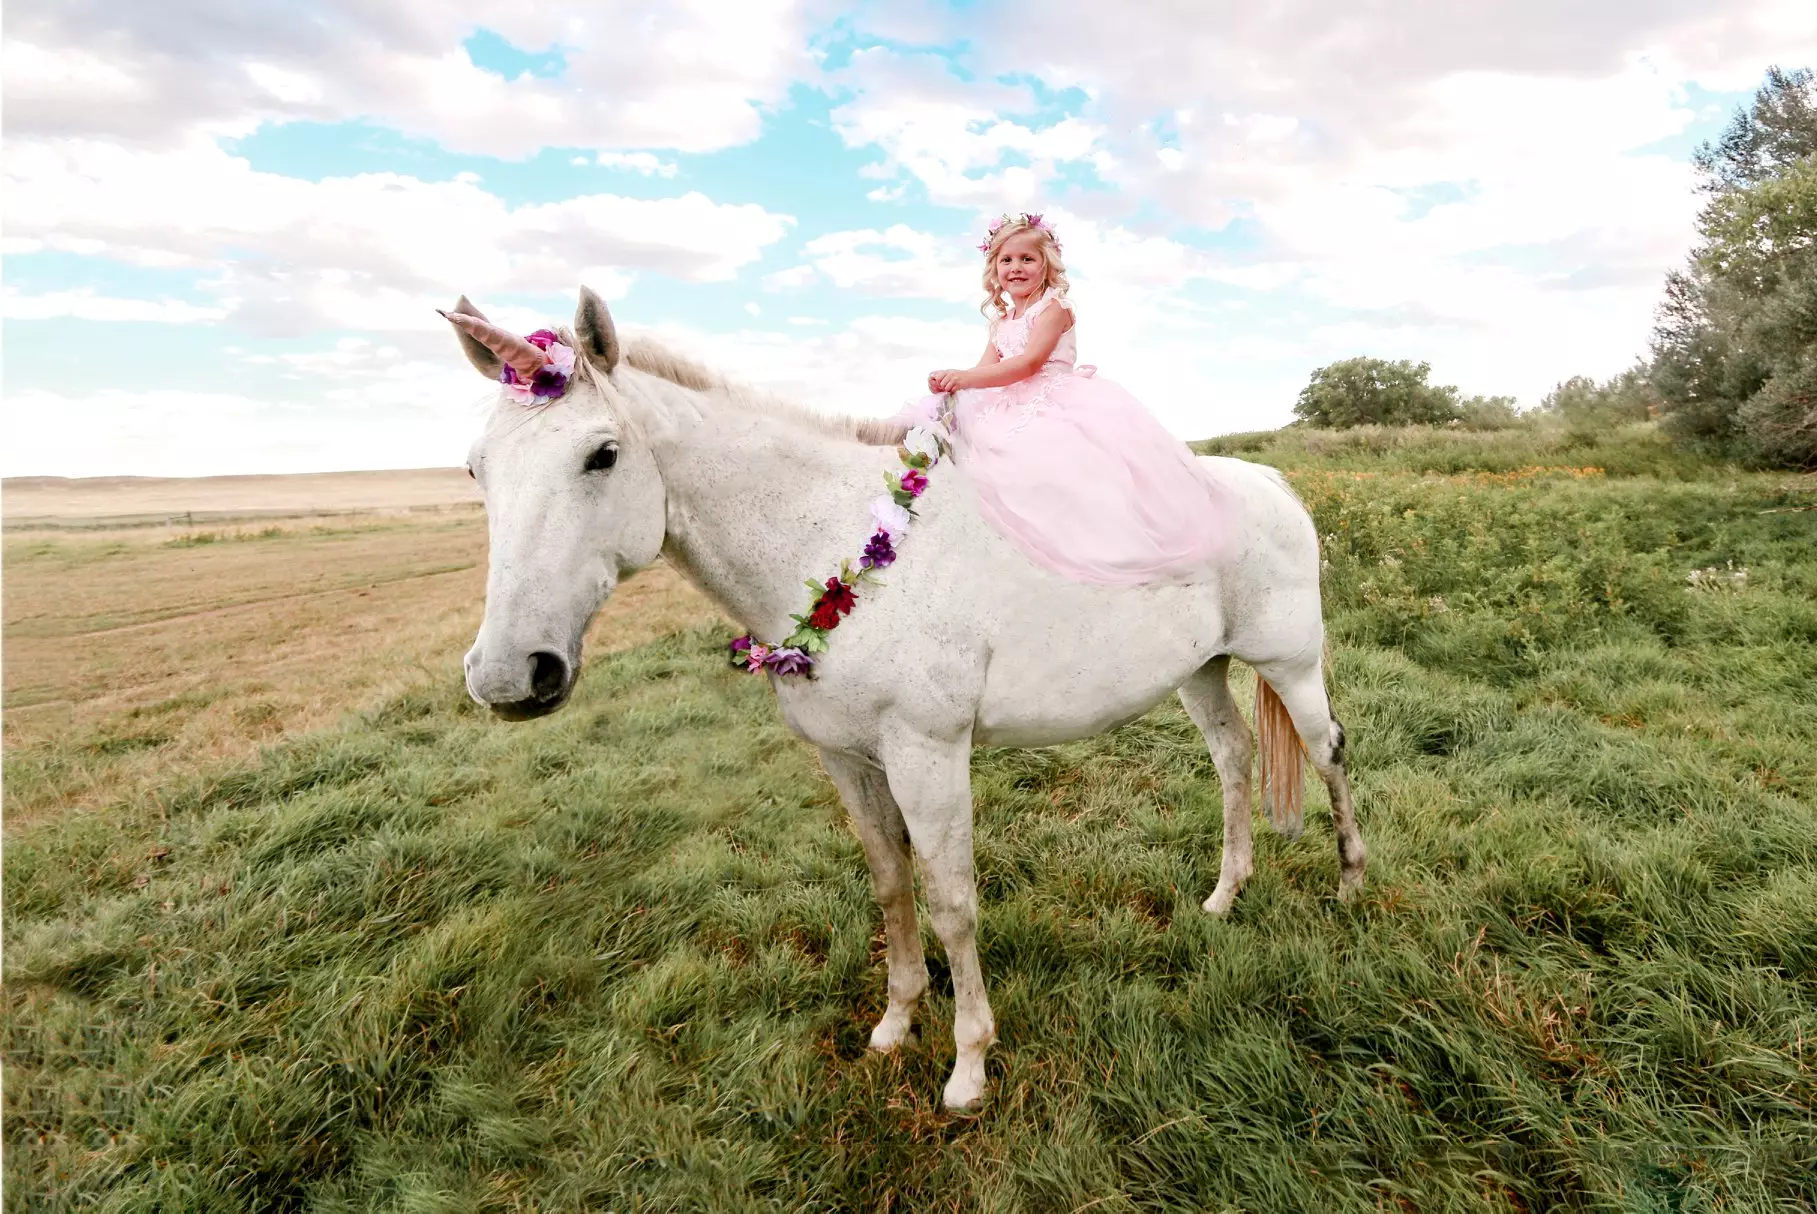 Elijah's sister Emilee had her own unicorn-themed shoot for her birthday.